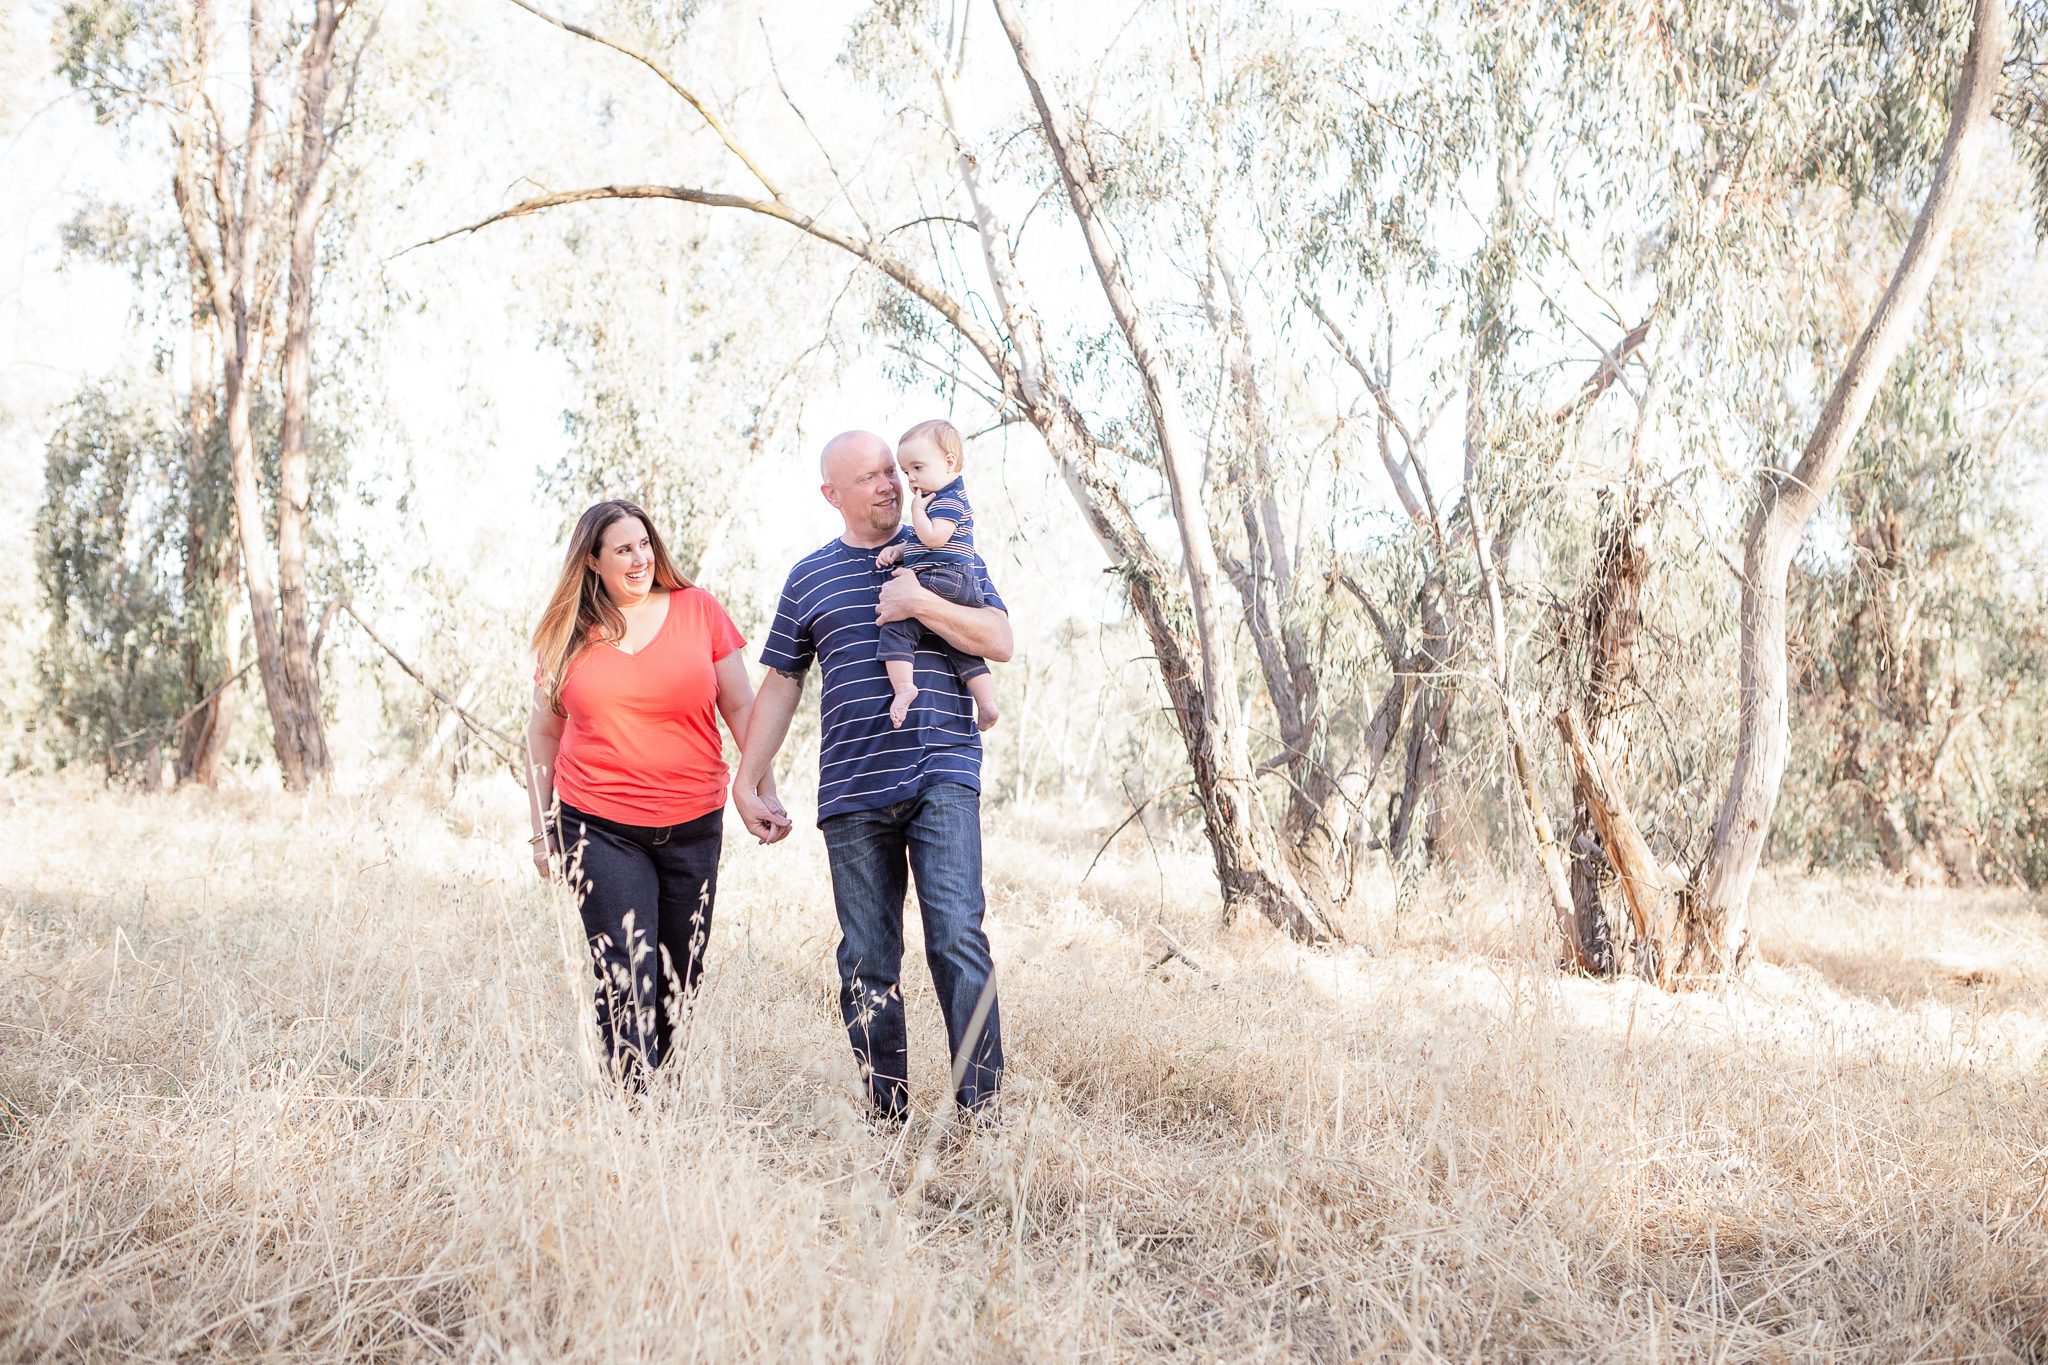 Fresno Family Photographer, Mom, Dad, and Baby walking in a field